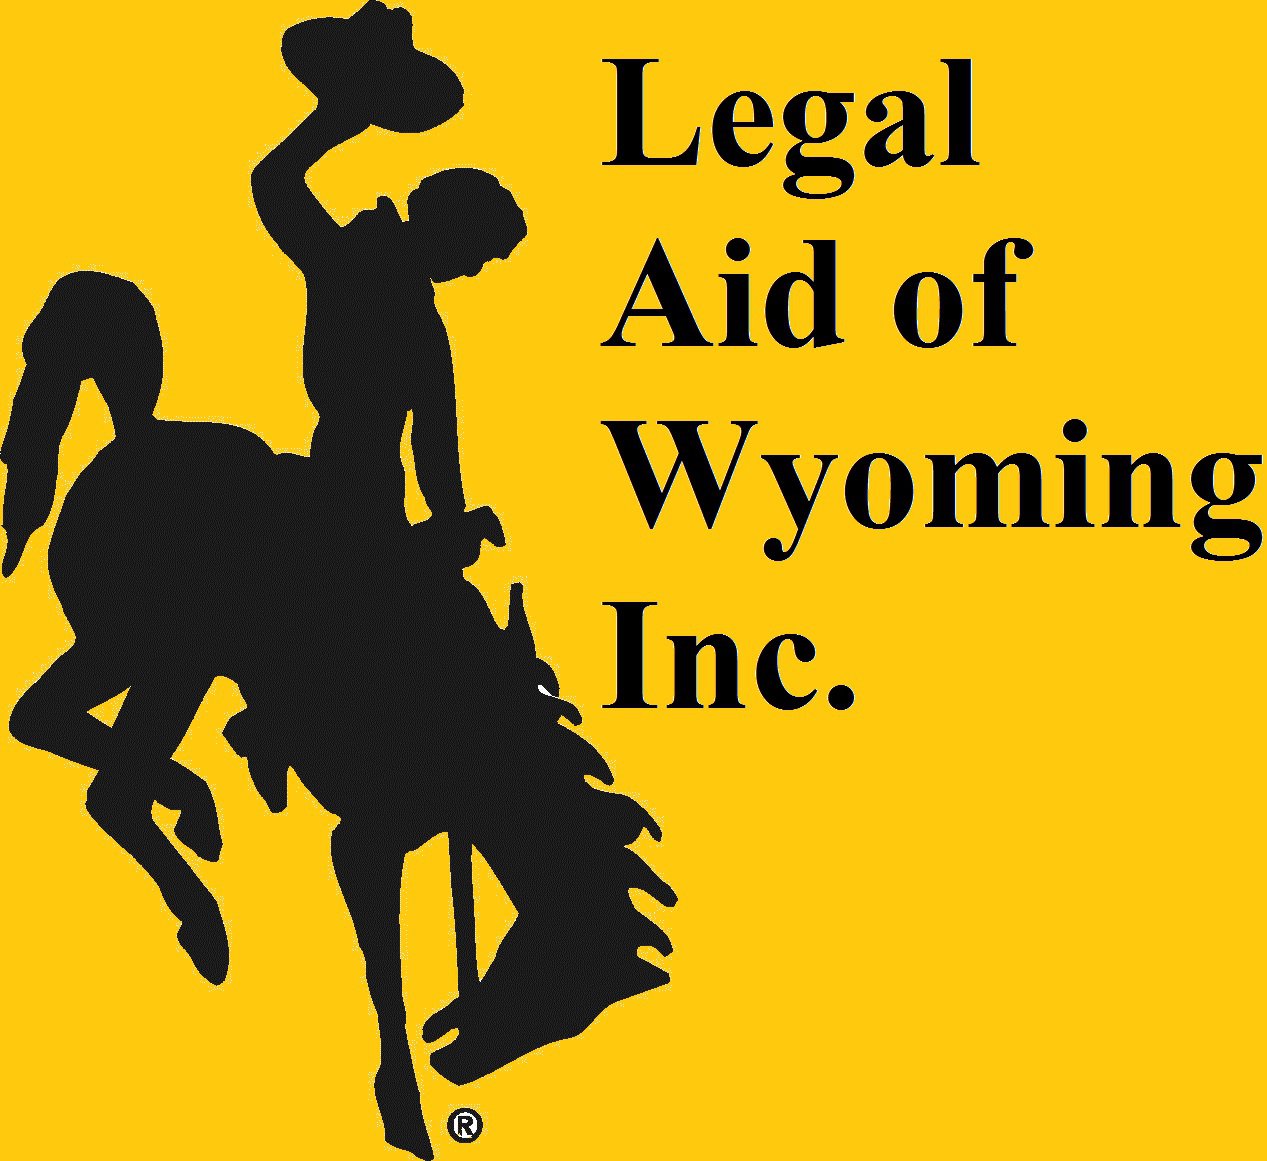 Legal Aid of Wyoming - Cody Office